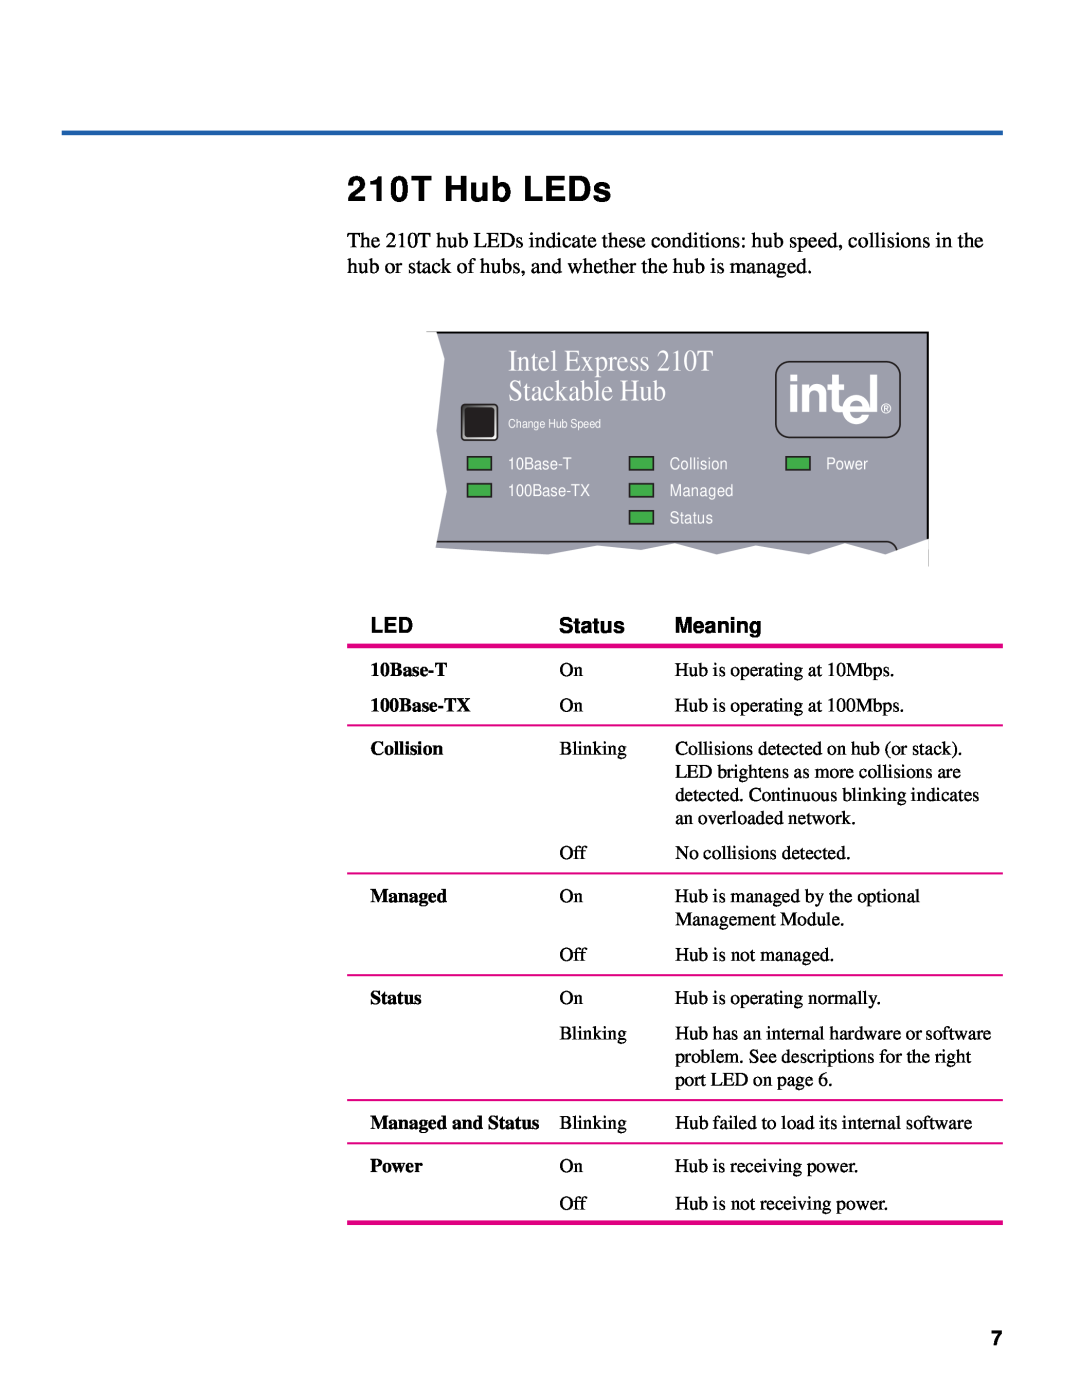 Intel 220T 210T Hub LEDs, Intel Express 210T, Stackable Hub, Status, Meaning, 10Base-T, 100Base-TX, Collision, Managed 